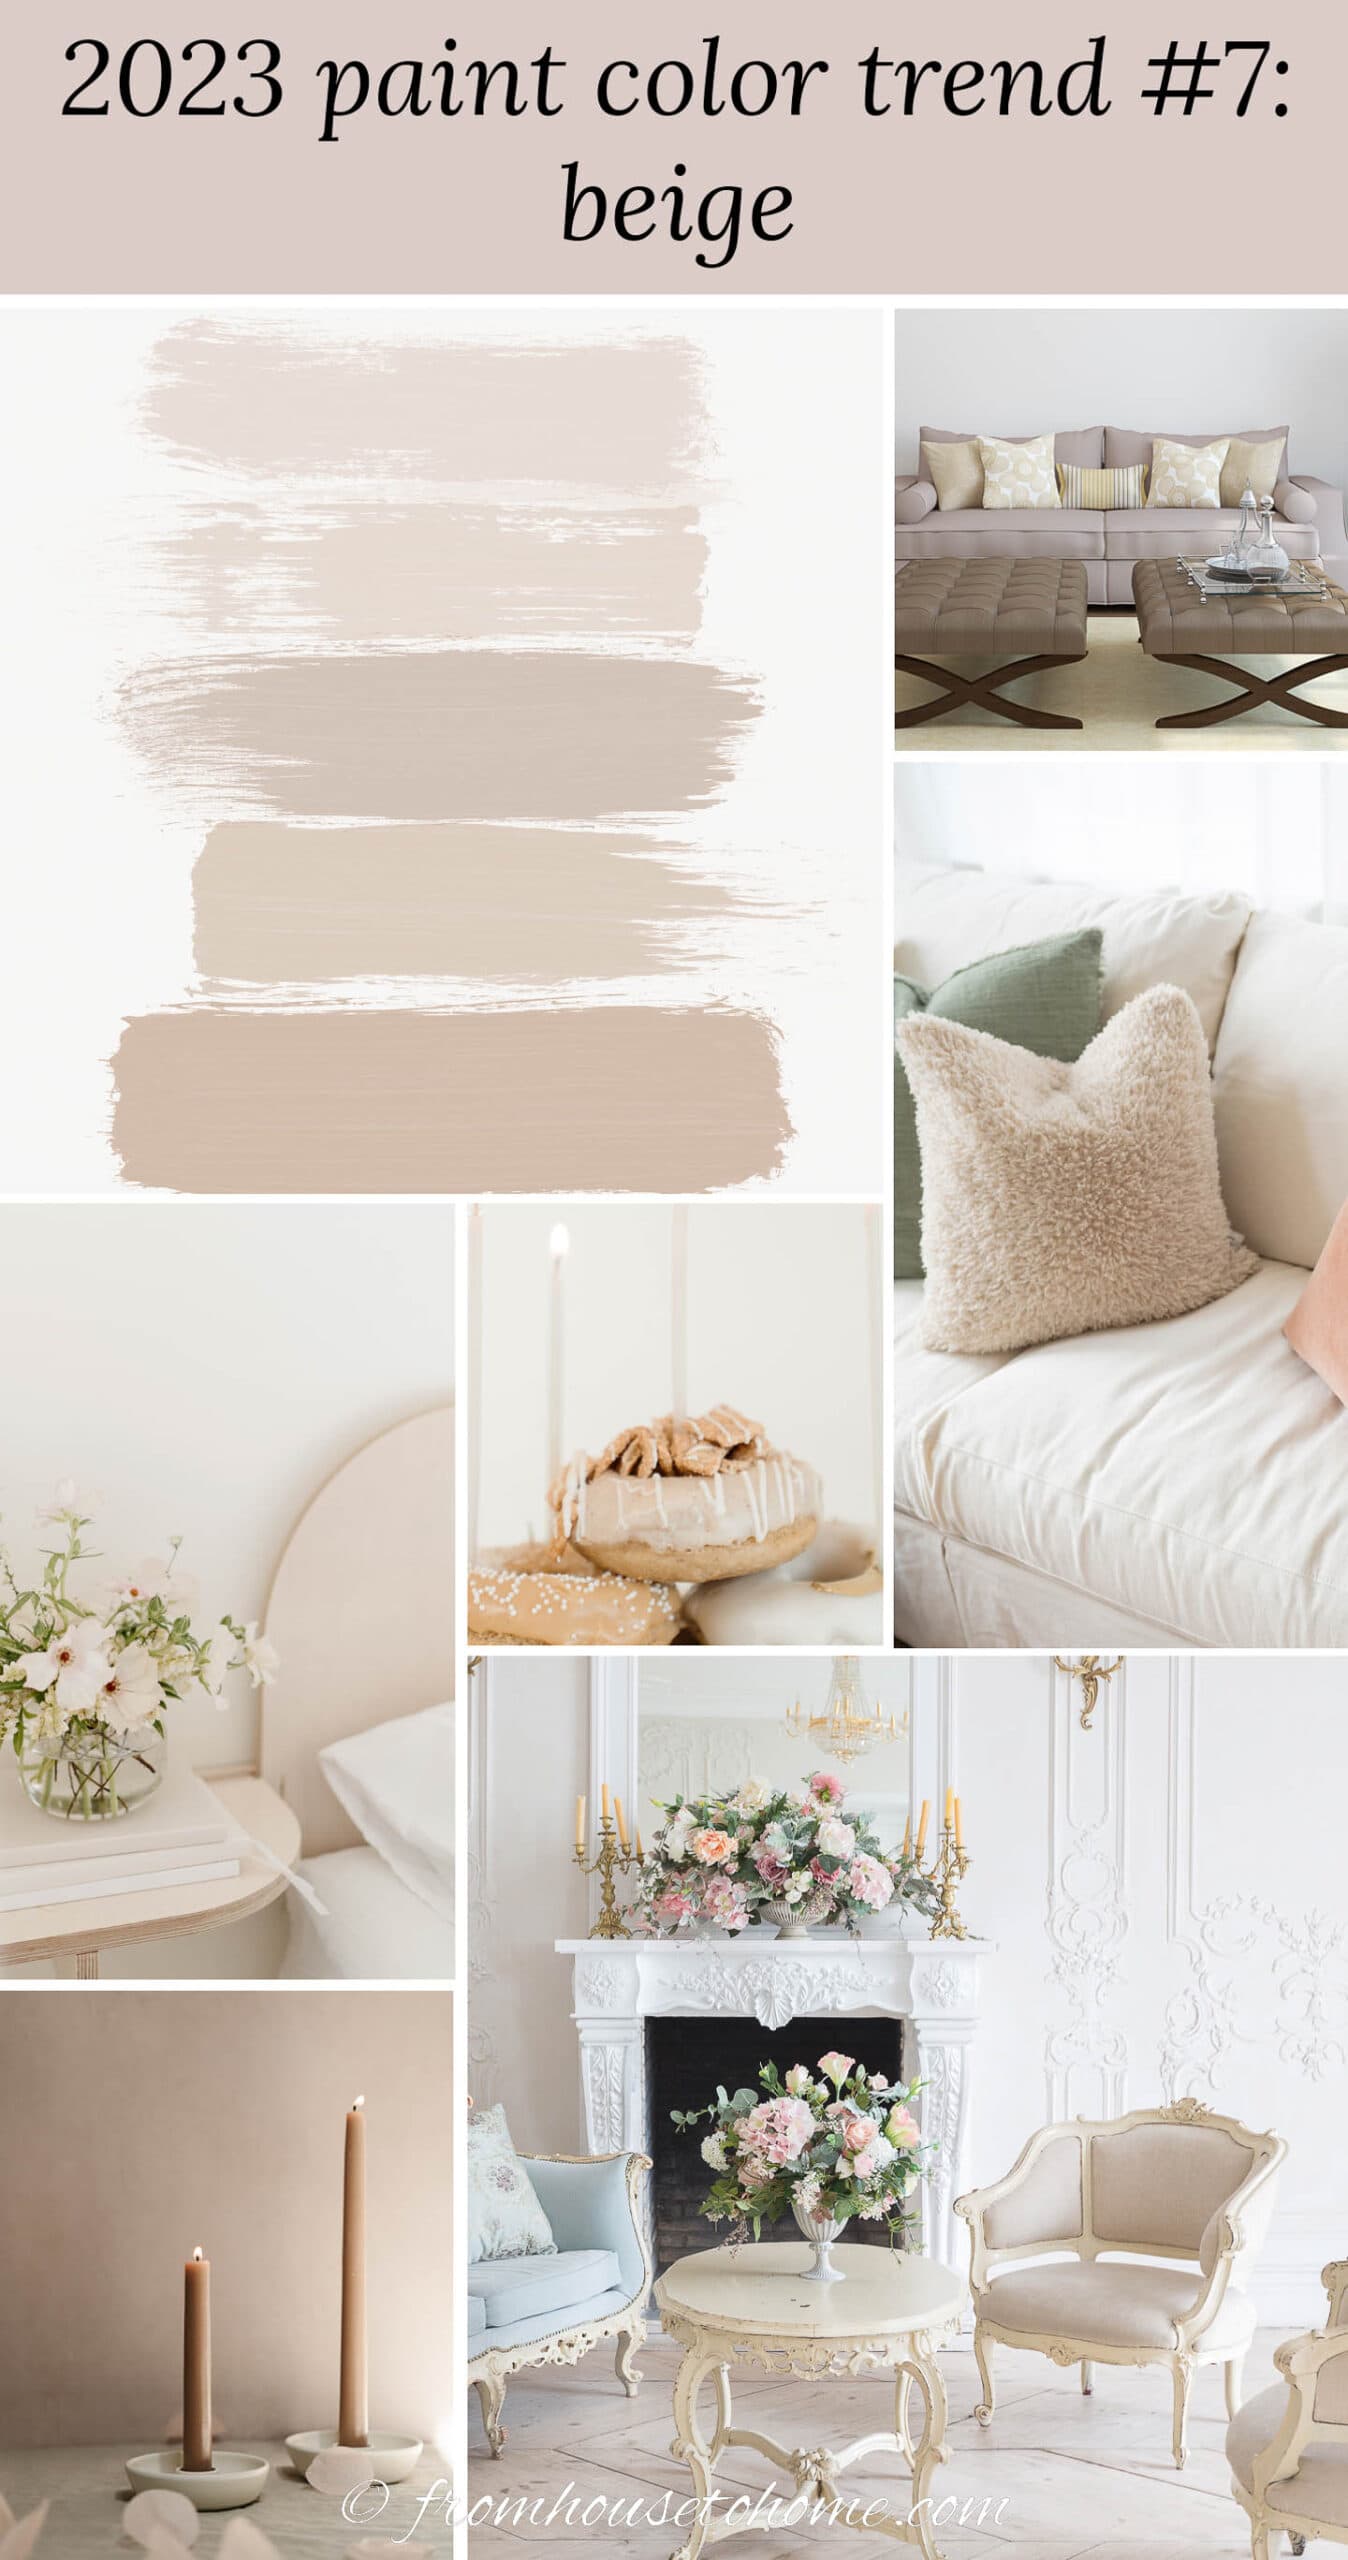 A collage of images using the 2023 paint color trend - beige